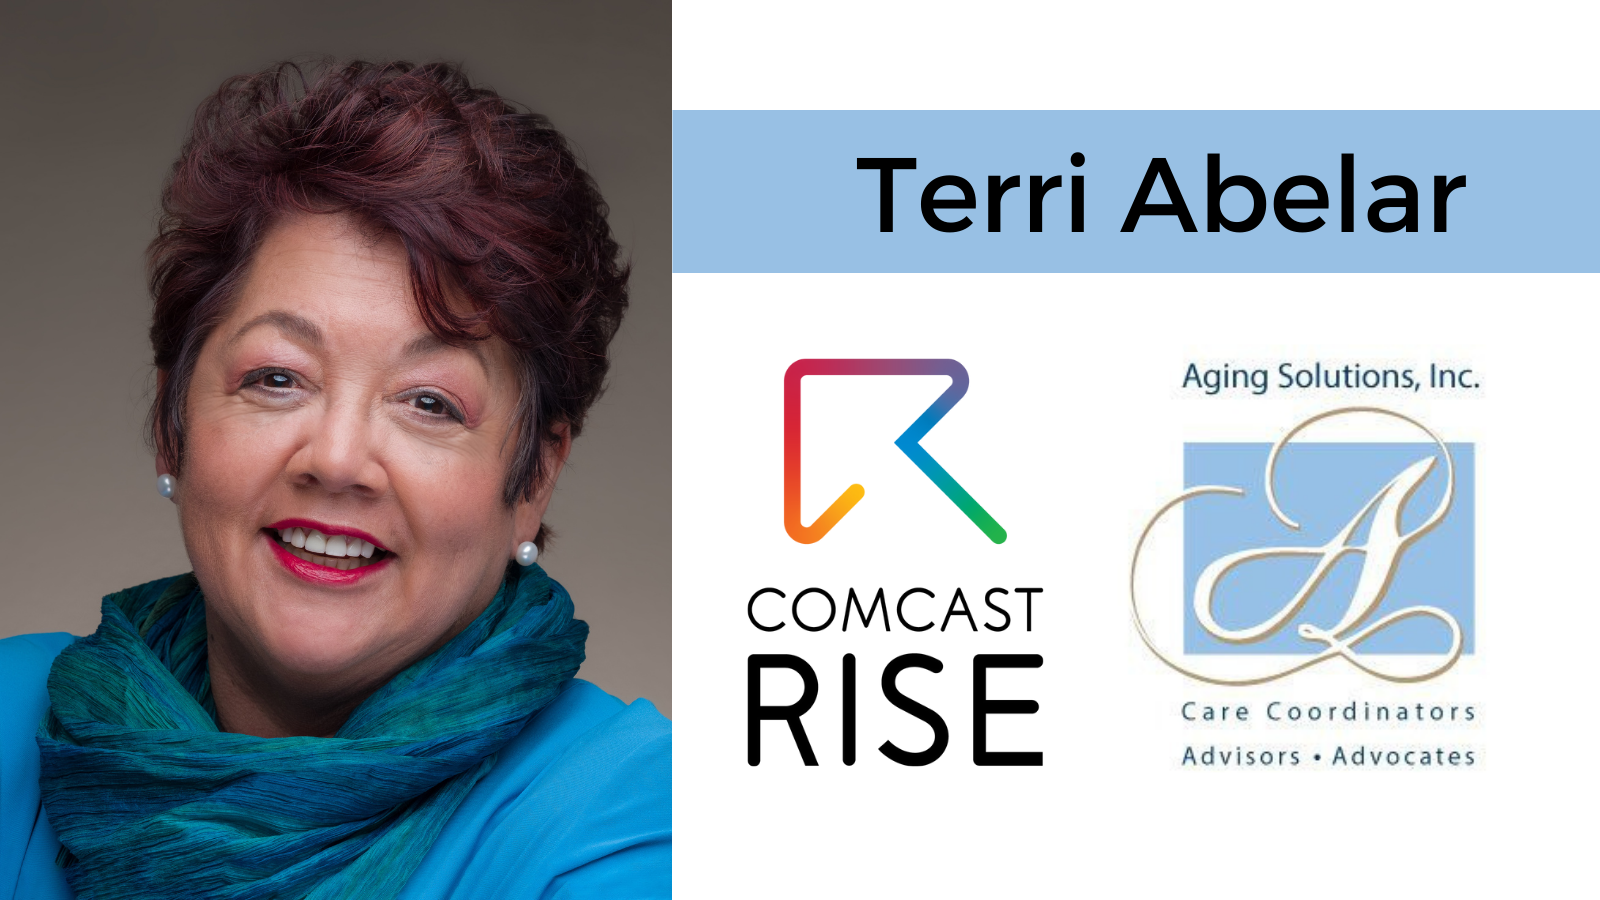 Terri Abelar: A Latina Pioneer Improving Quality of Life for the Elderly